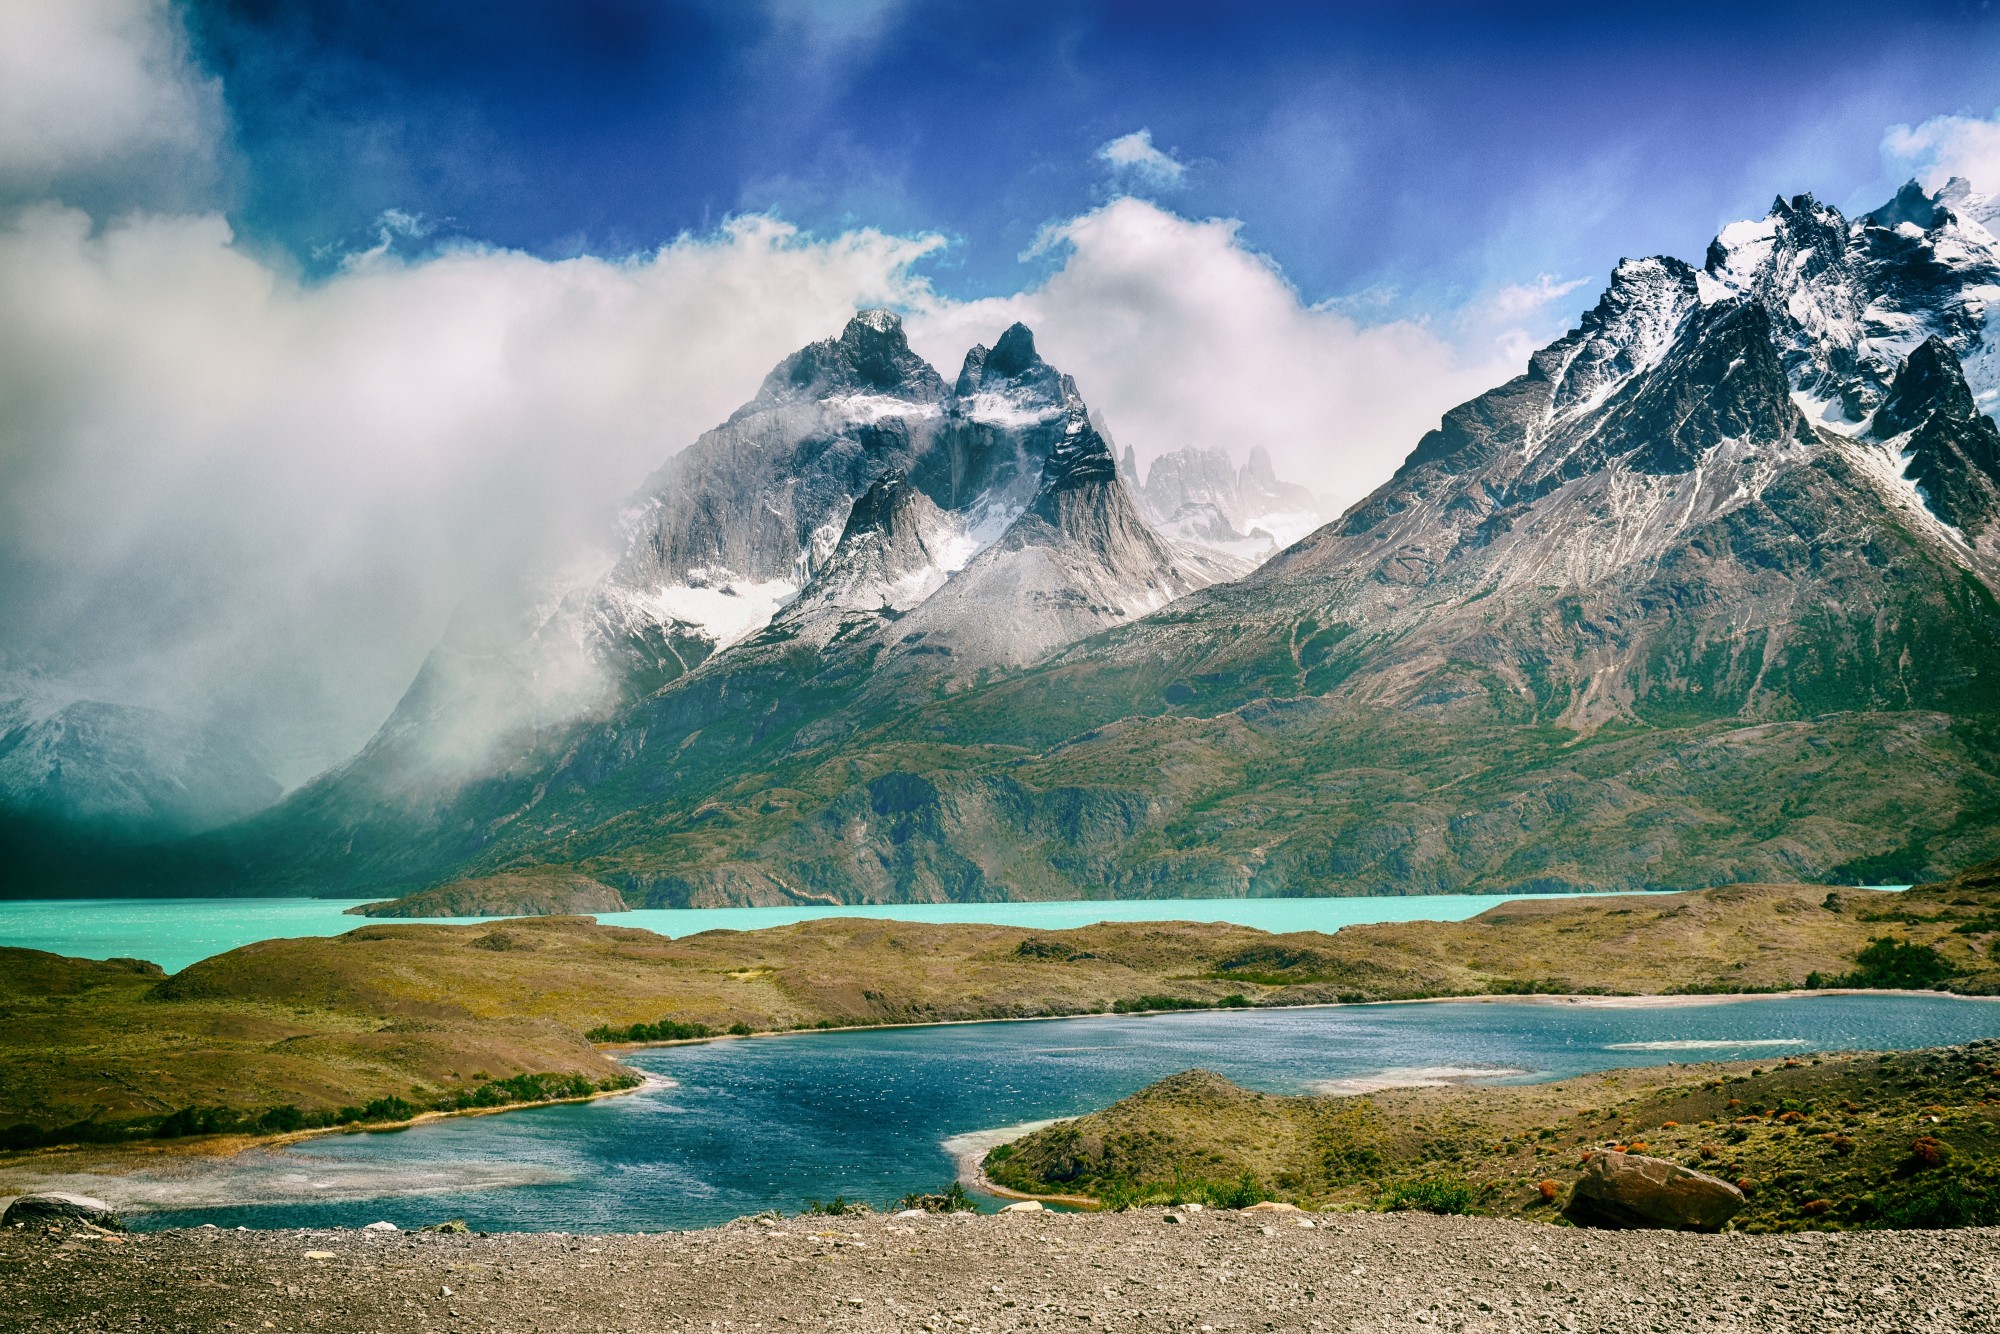 We Guarantee That These 20 Photos Will Make You Want To Go To Chile AWOL